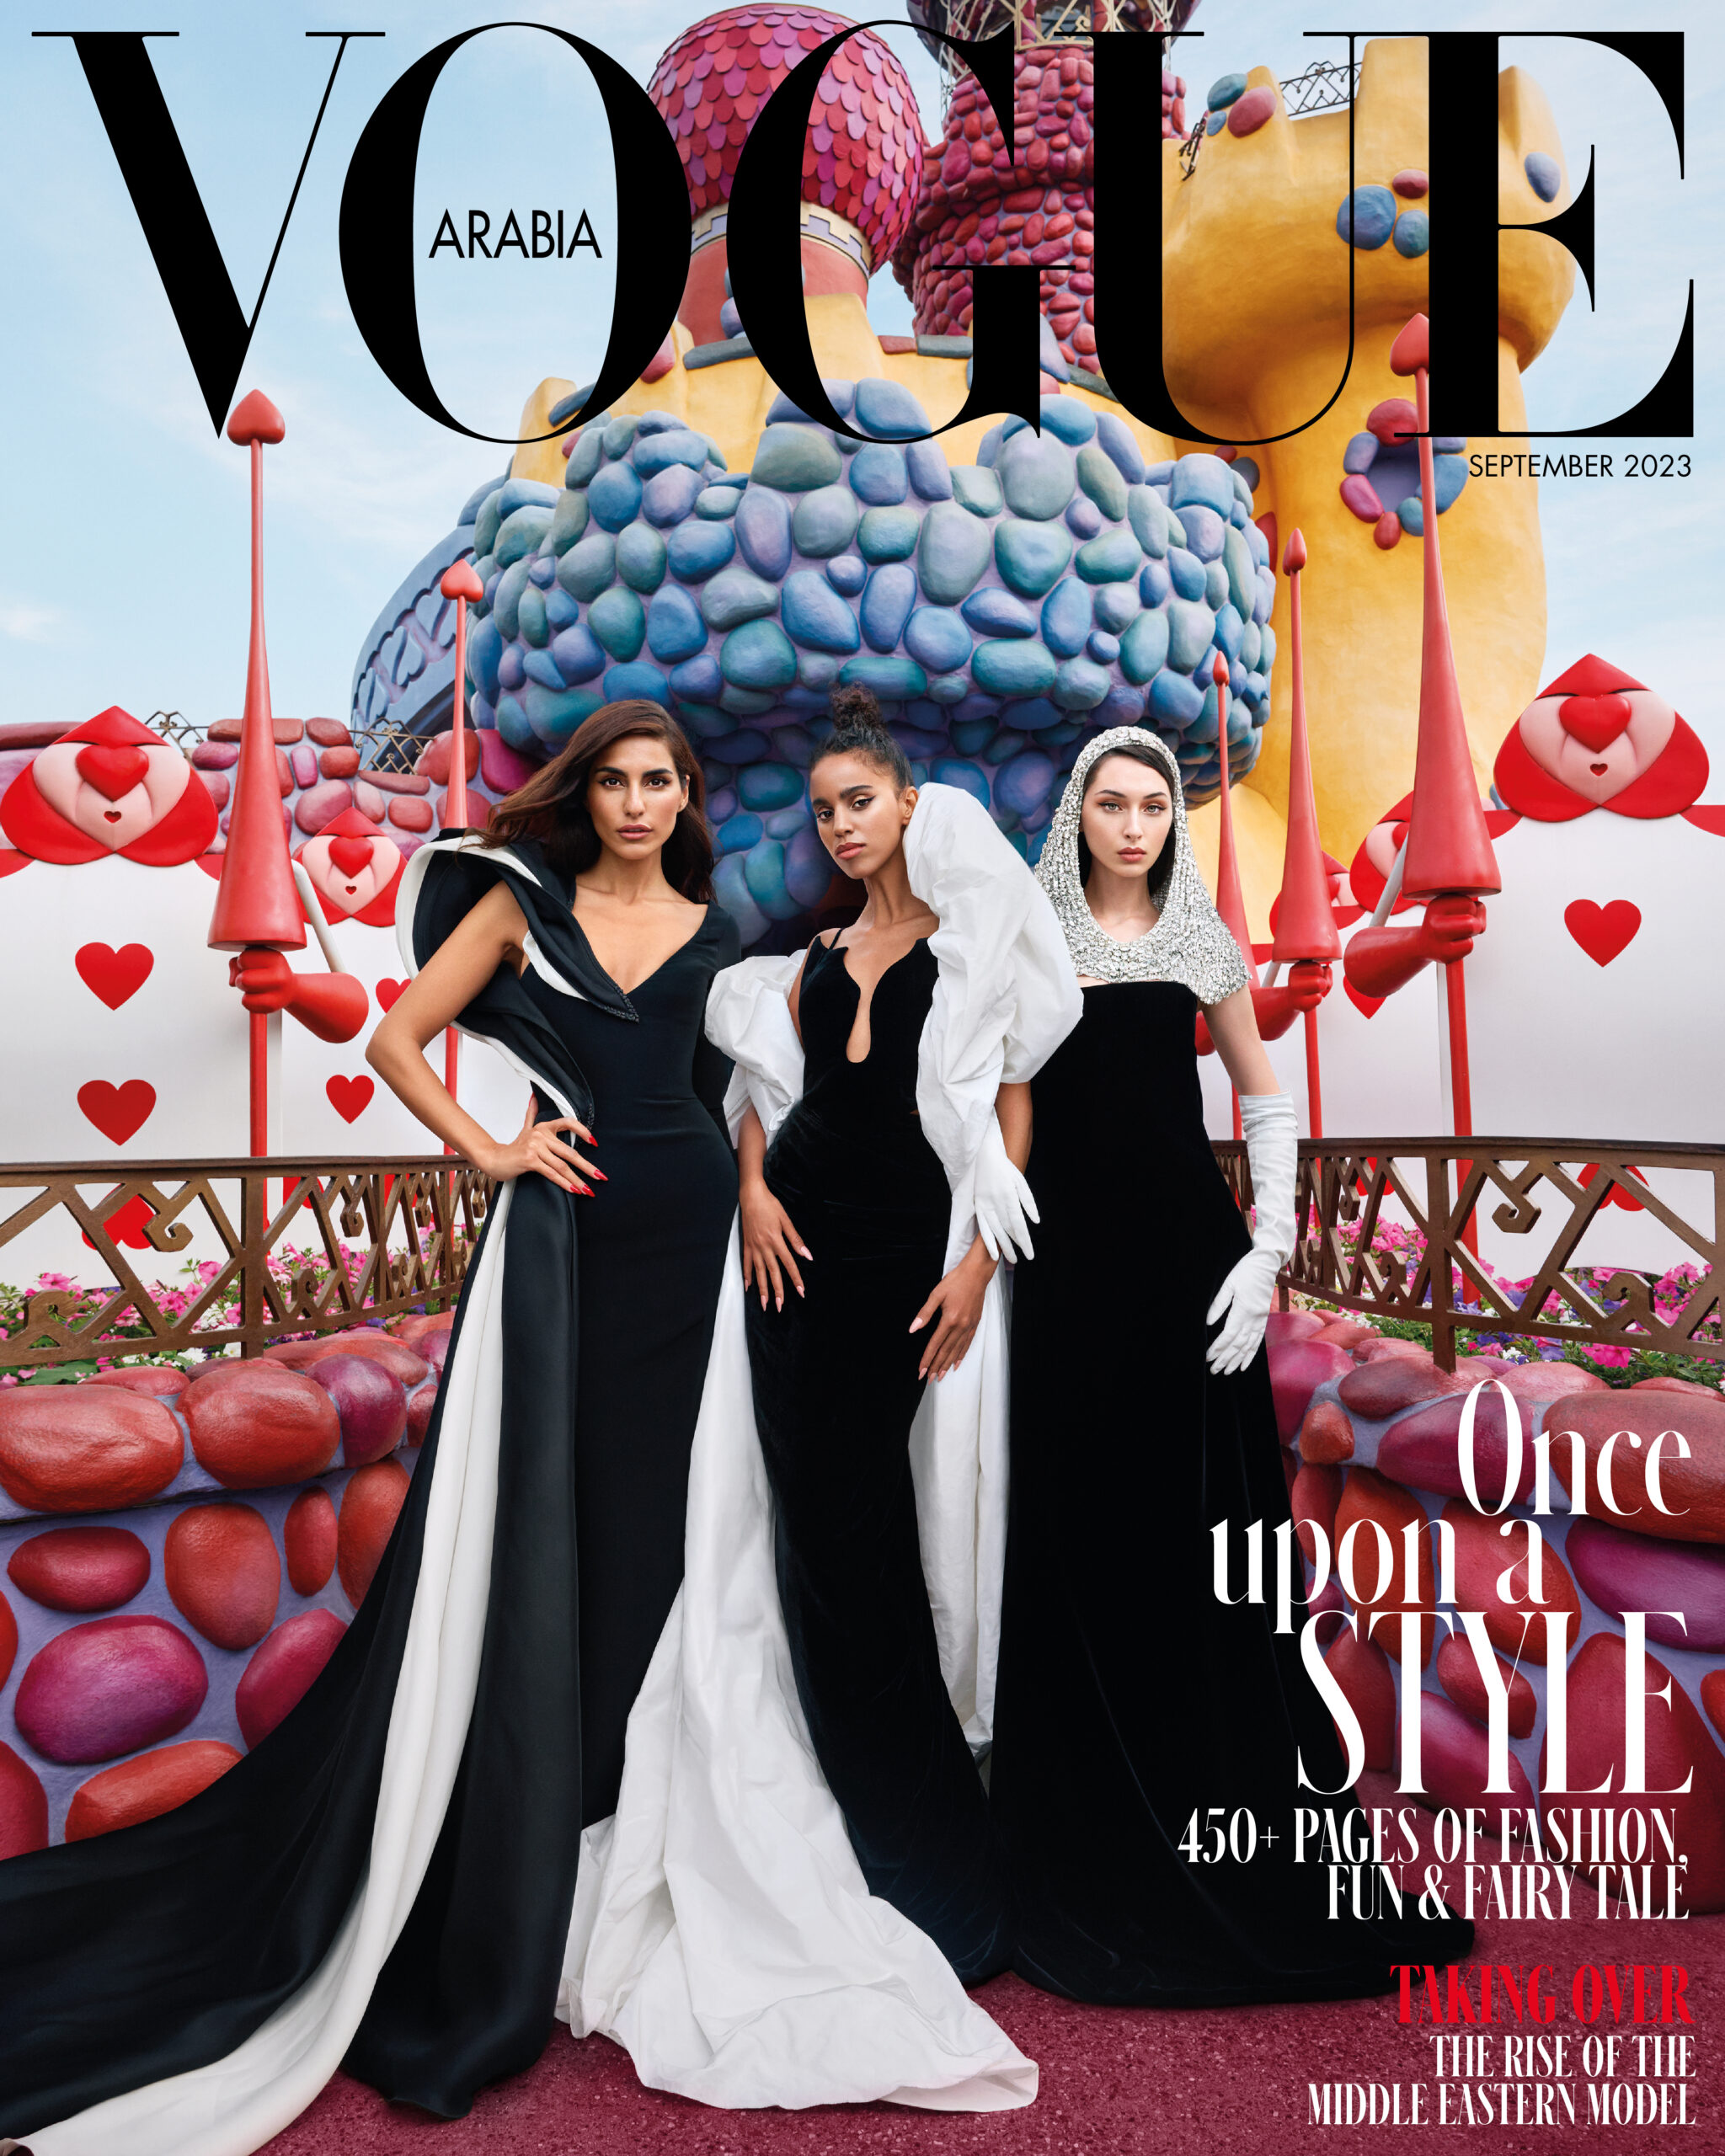 Vogue Arabia September Issue 2023: Fashion and Fairy Tale